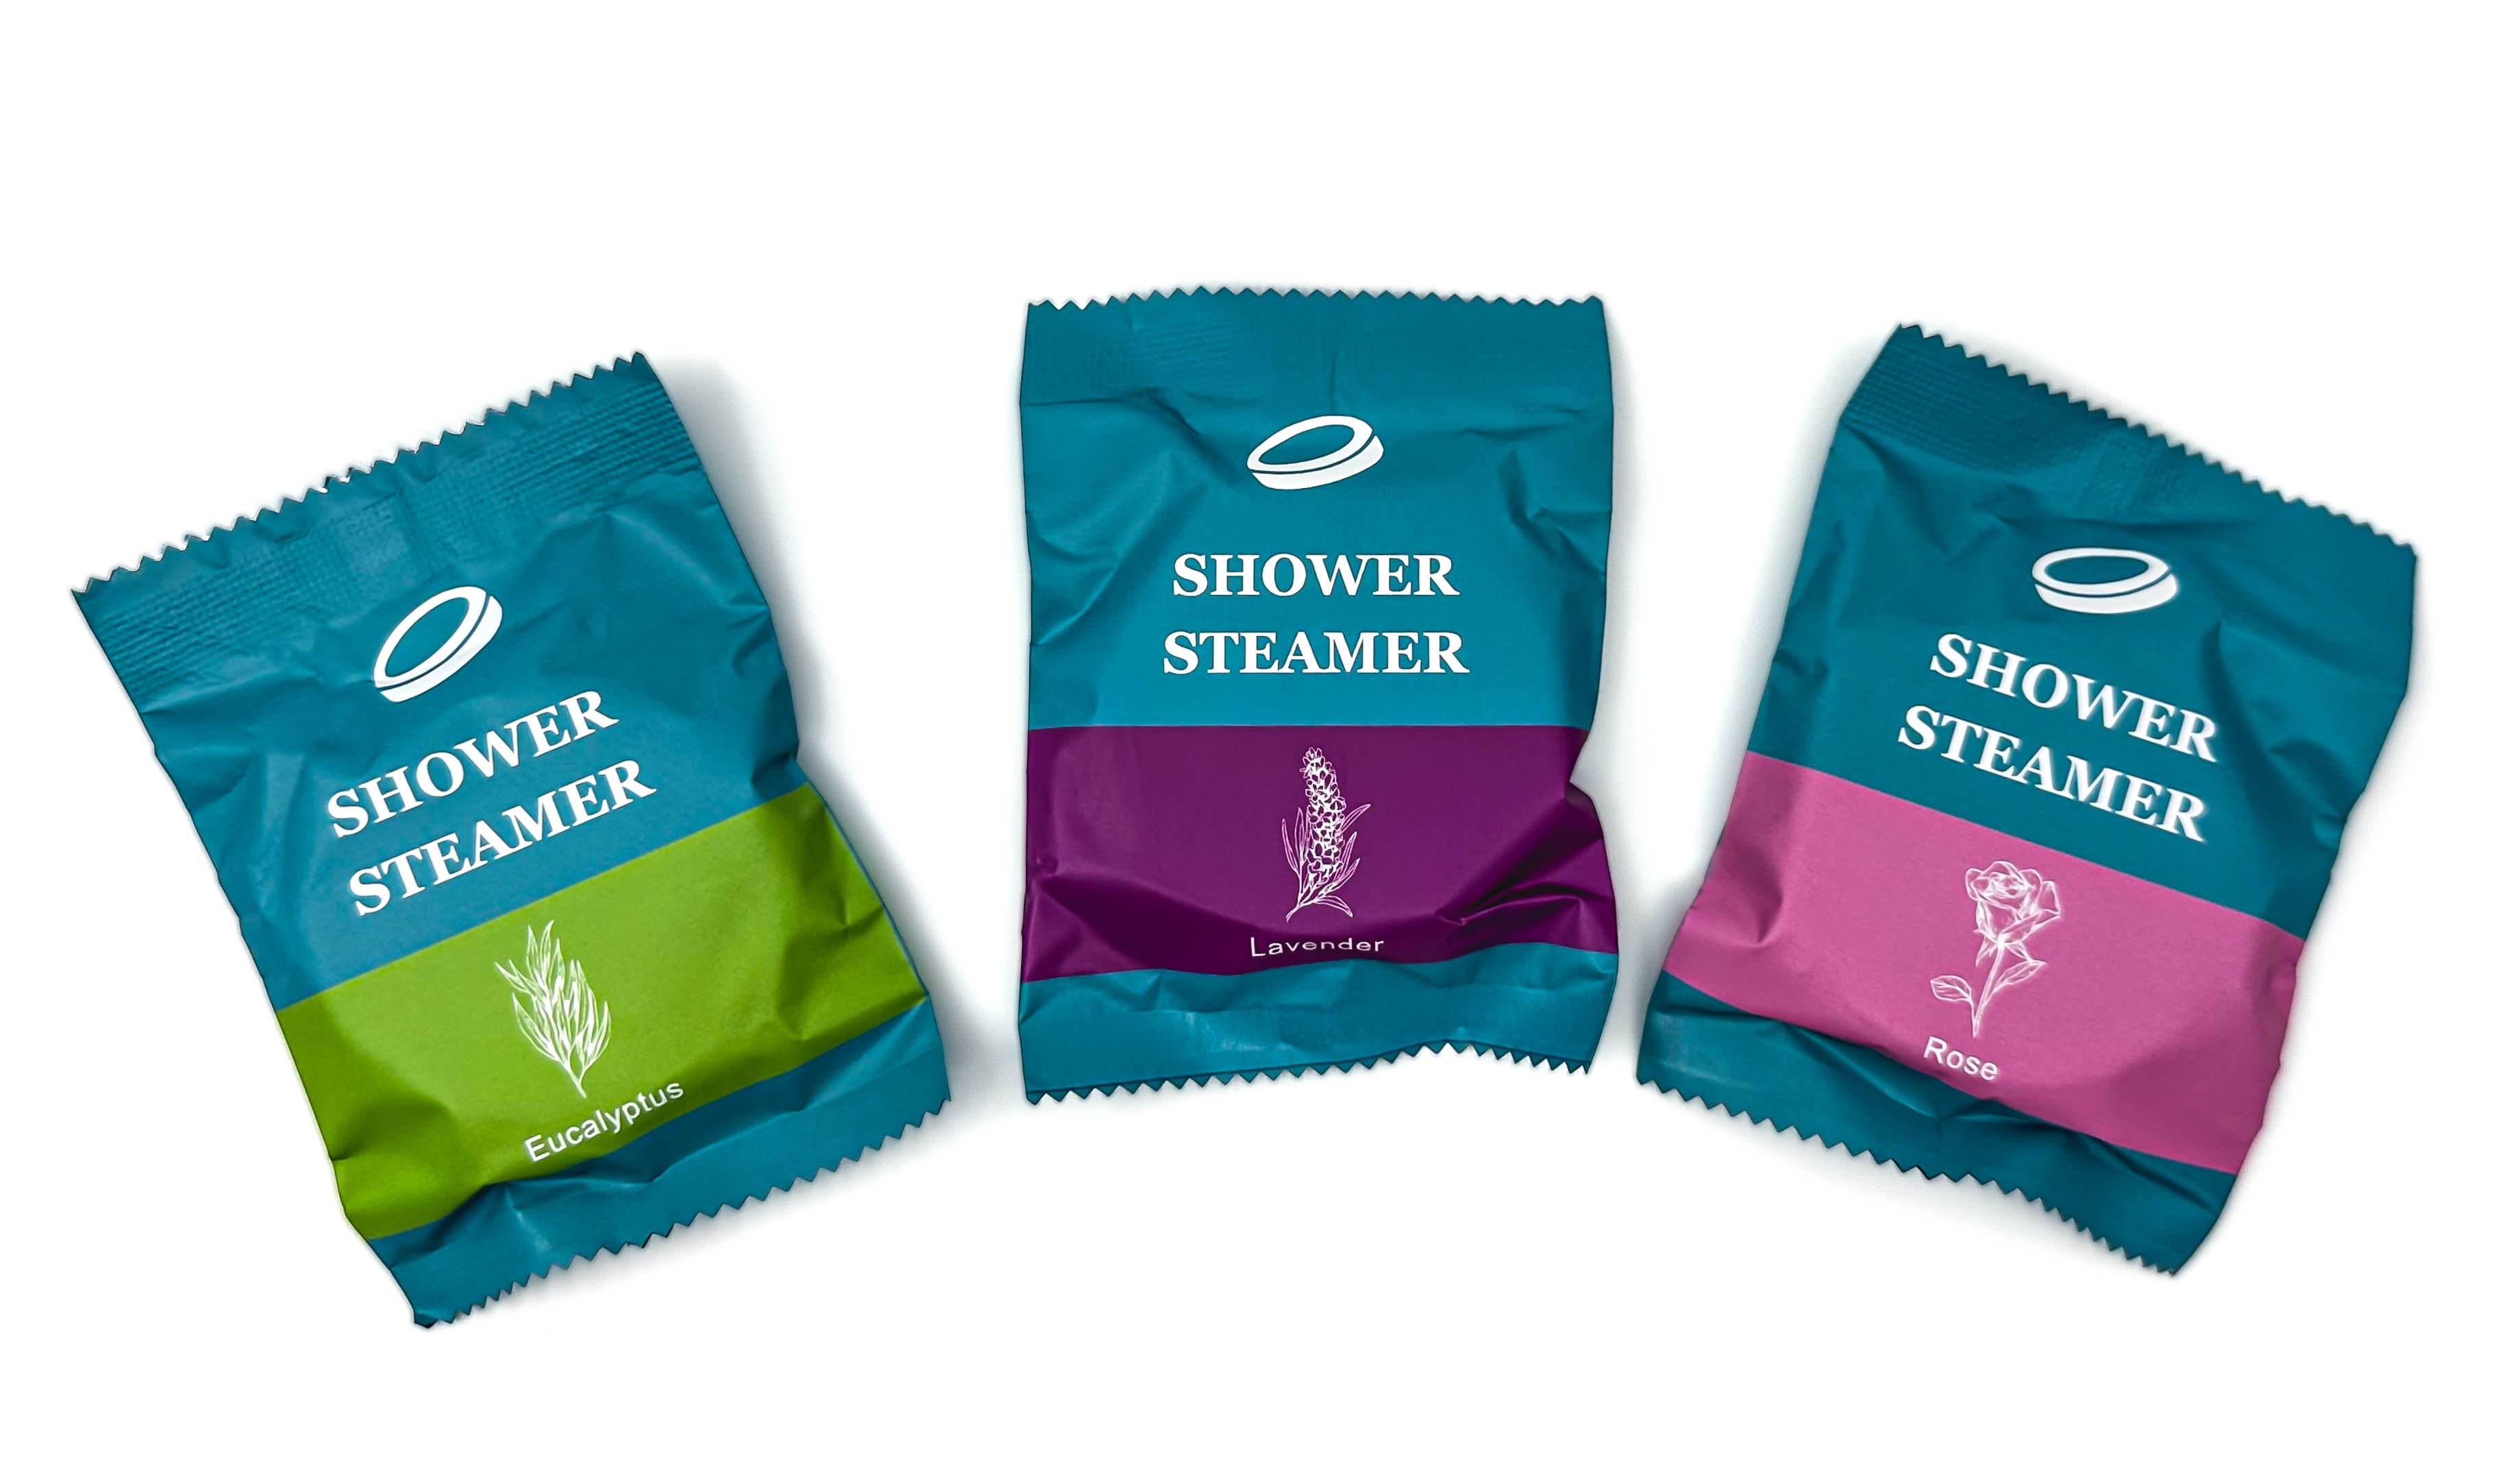 6 Pack (2 Of Each Scent) &Balanced Shower Steamers